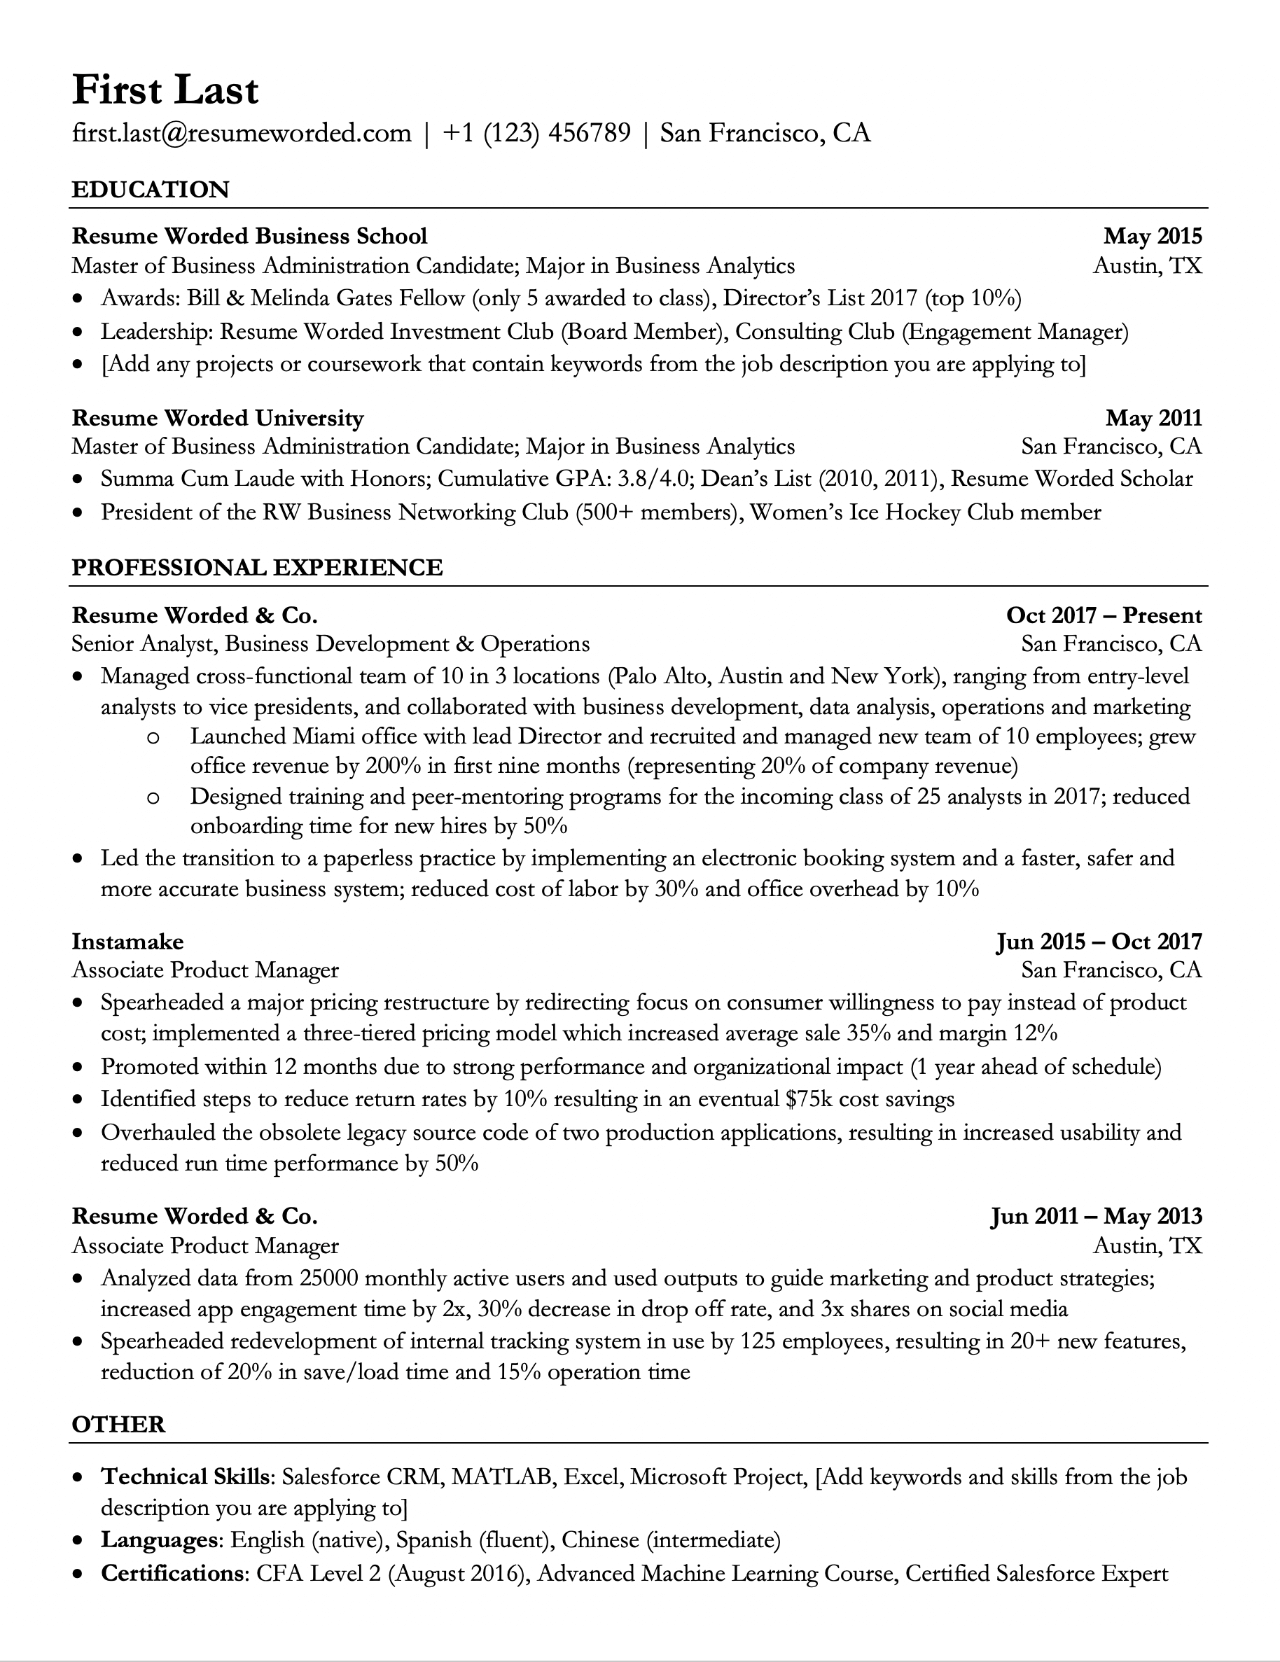 professional ats resume templates for experienced hires